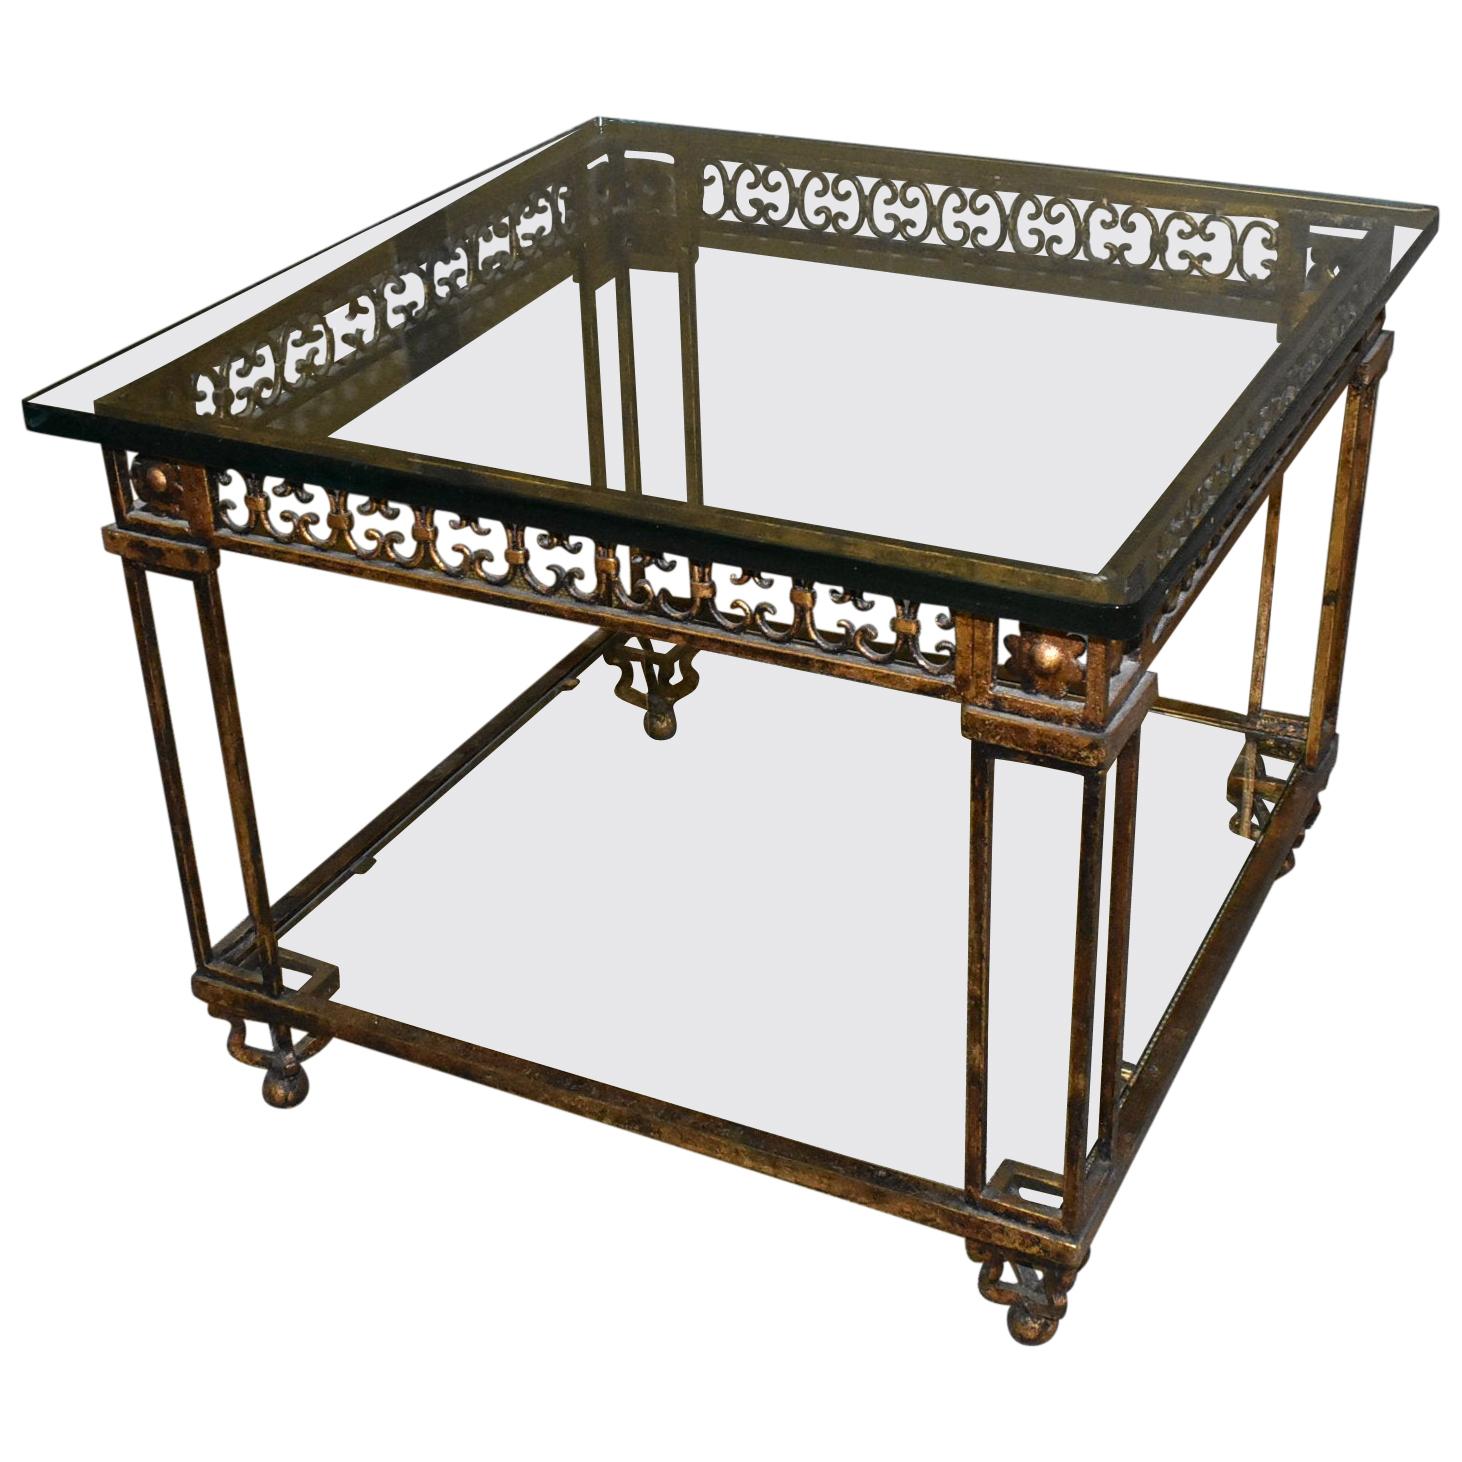 Iron and Glass Top Antique Gold Neoclassical Table with Bottom Shelf